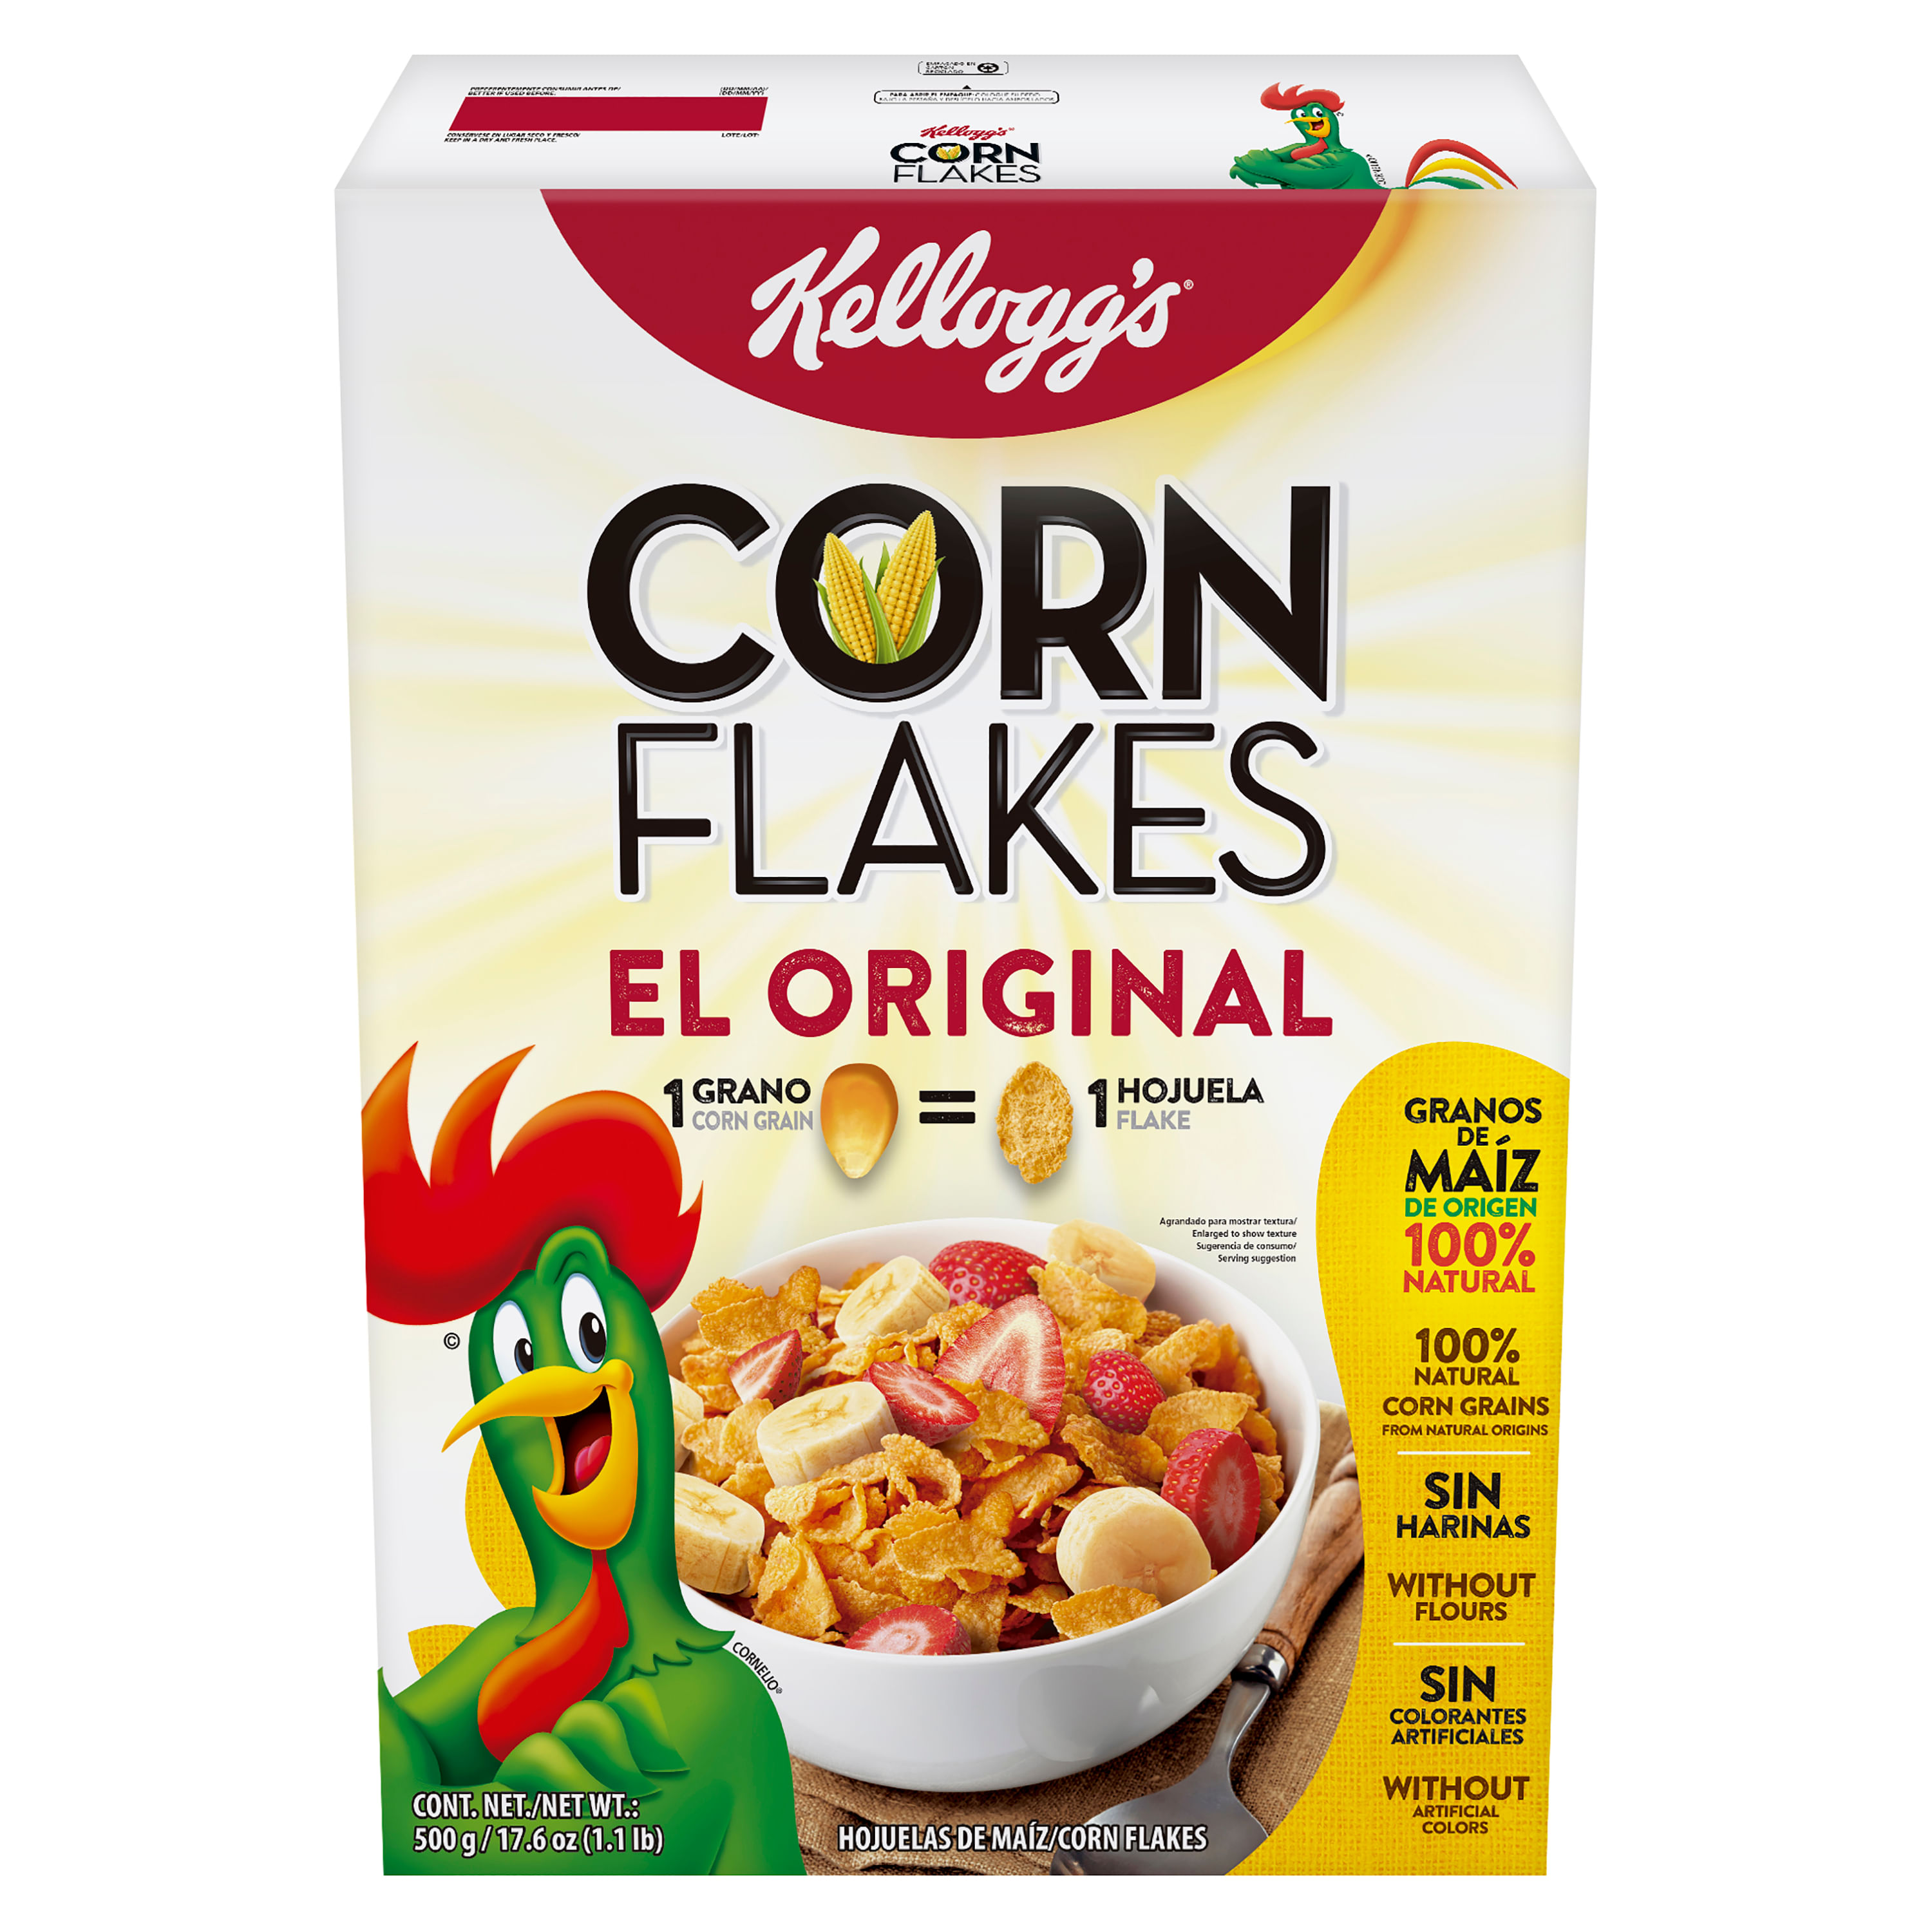 Sugar Kellogg's Frosted Flakes® Cereal